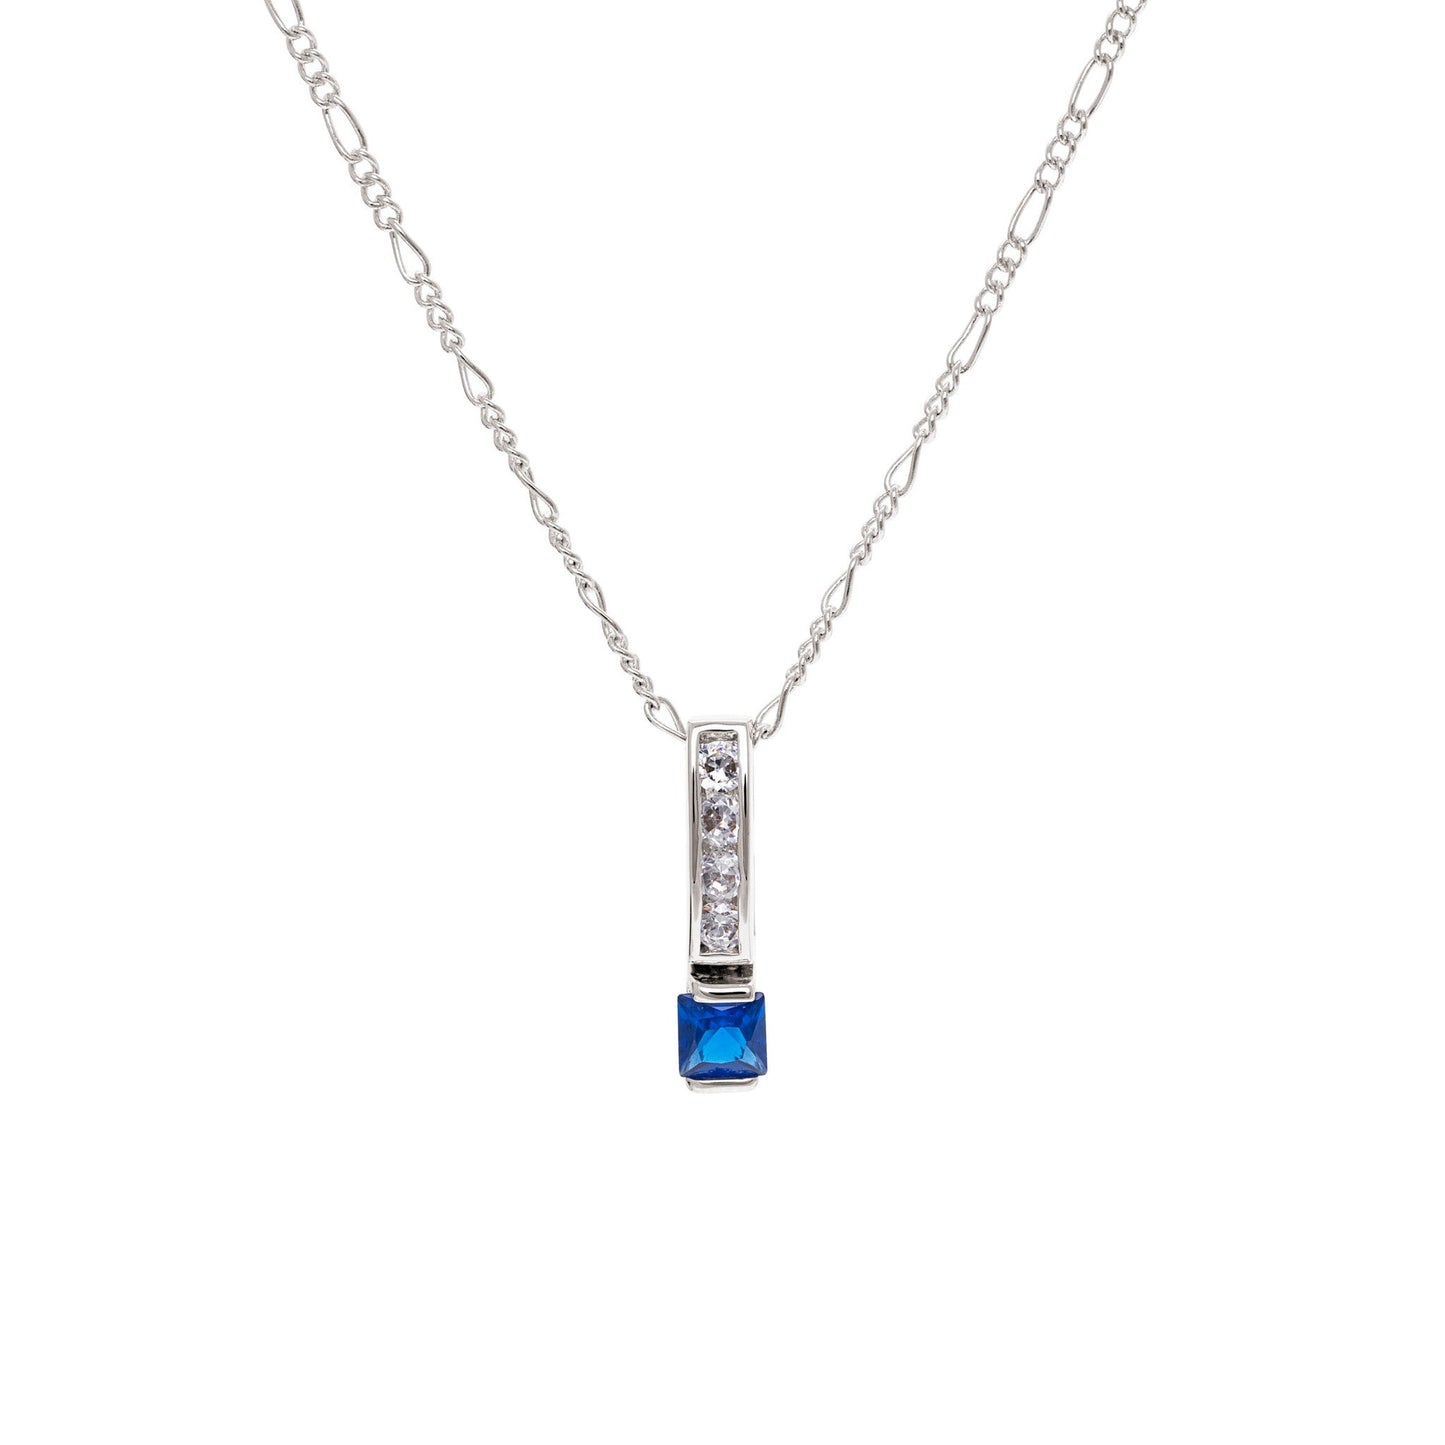 A square simulated diamond sapphire necklace displayed on a neutral white background.